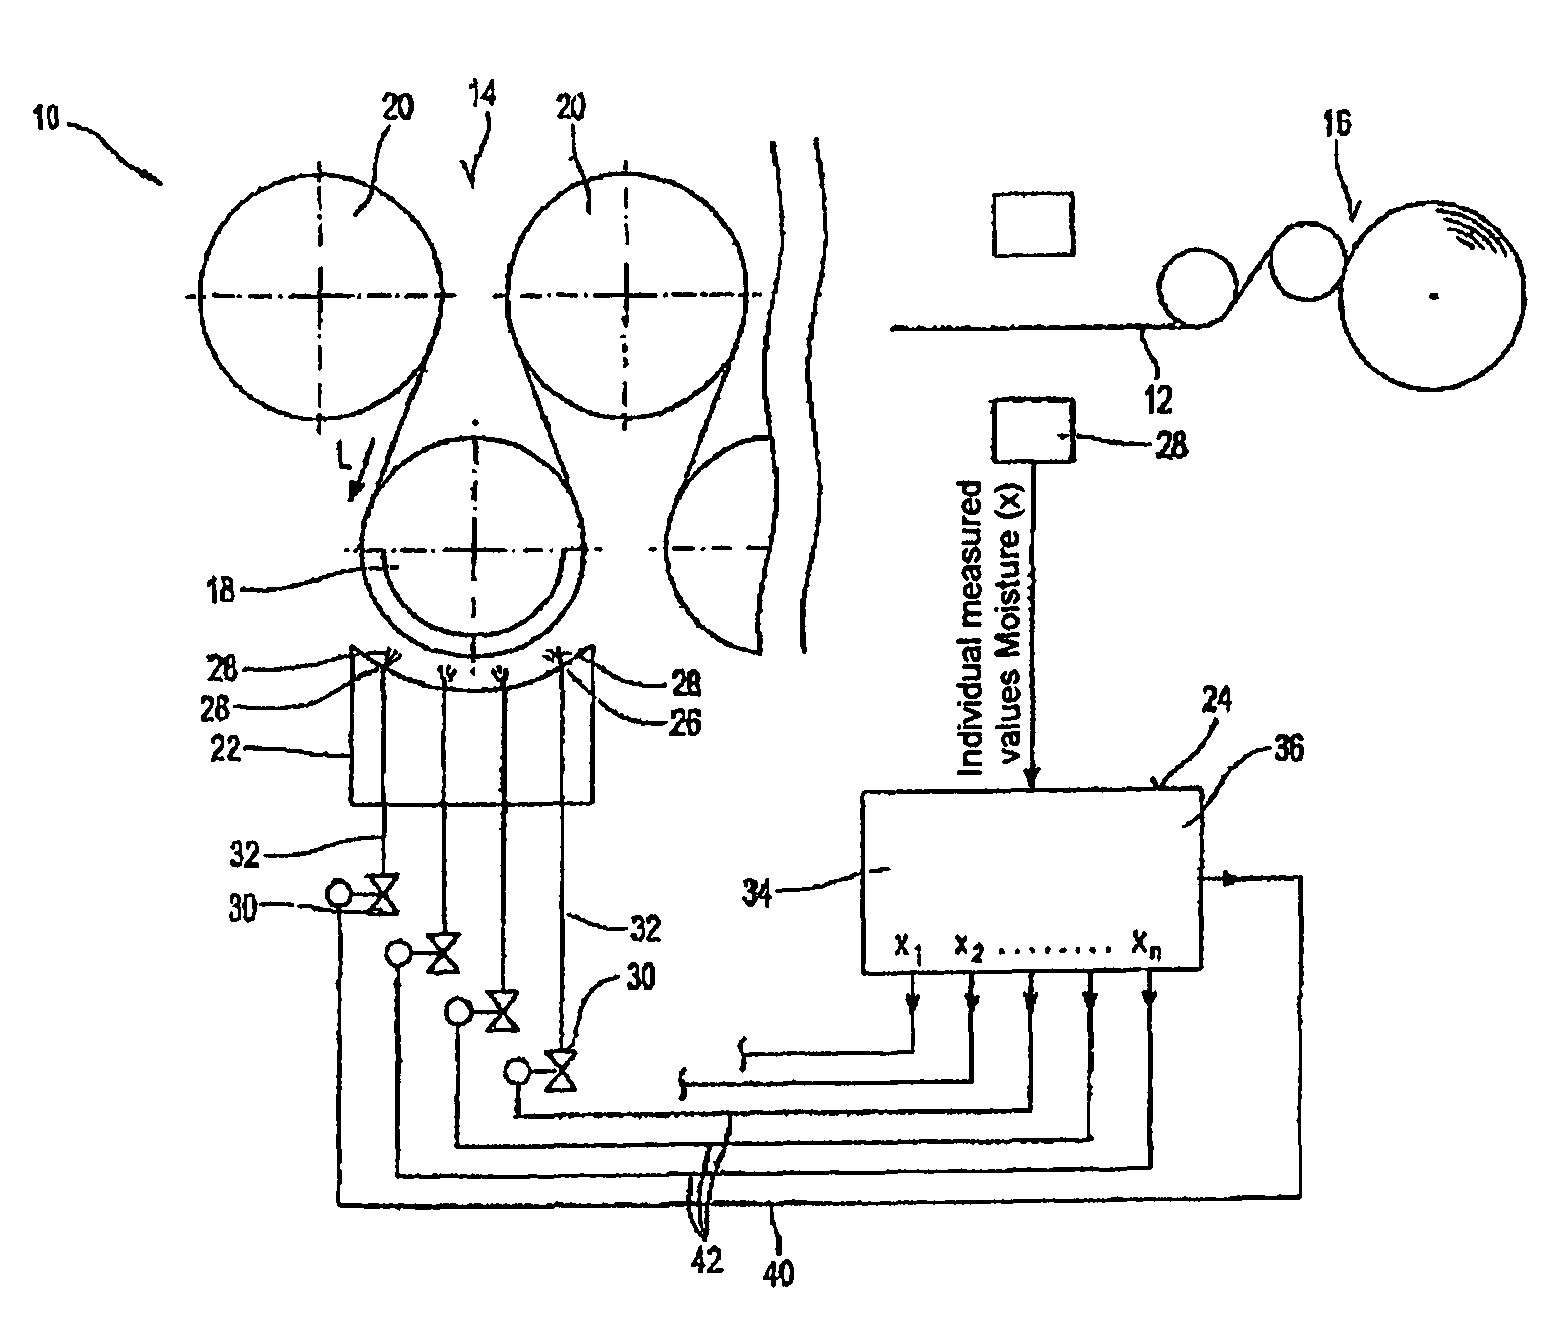 Equipment and method for producing and/or treating a fibrous web